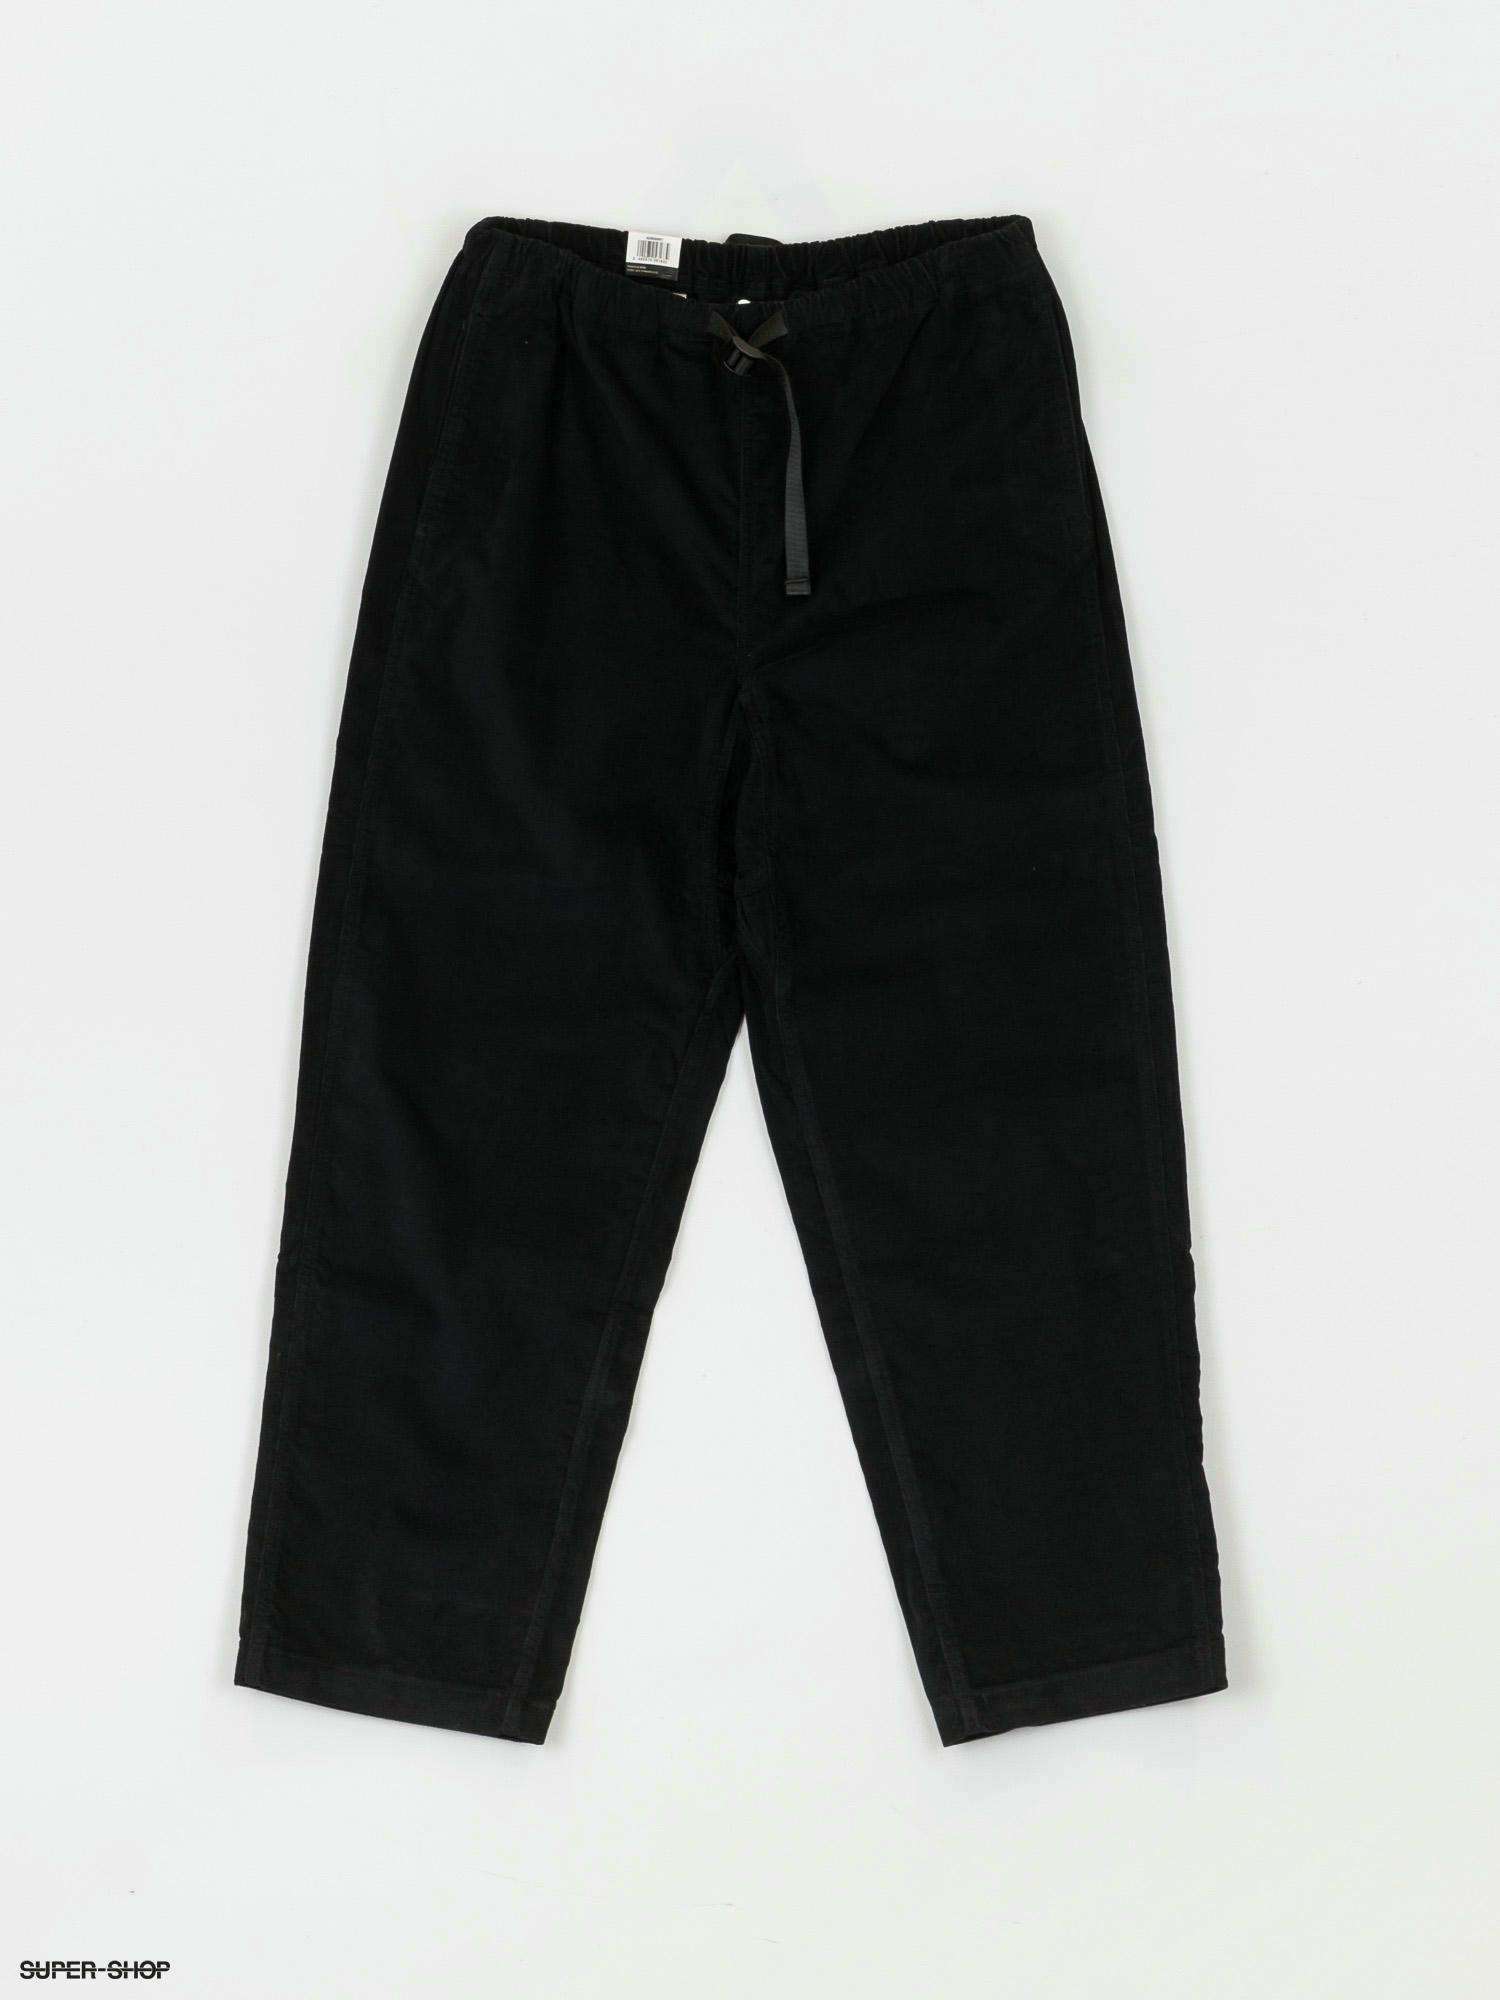 Levi's Skate Quick Release Pants (anthracite night)